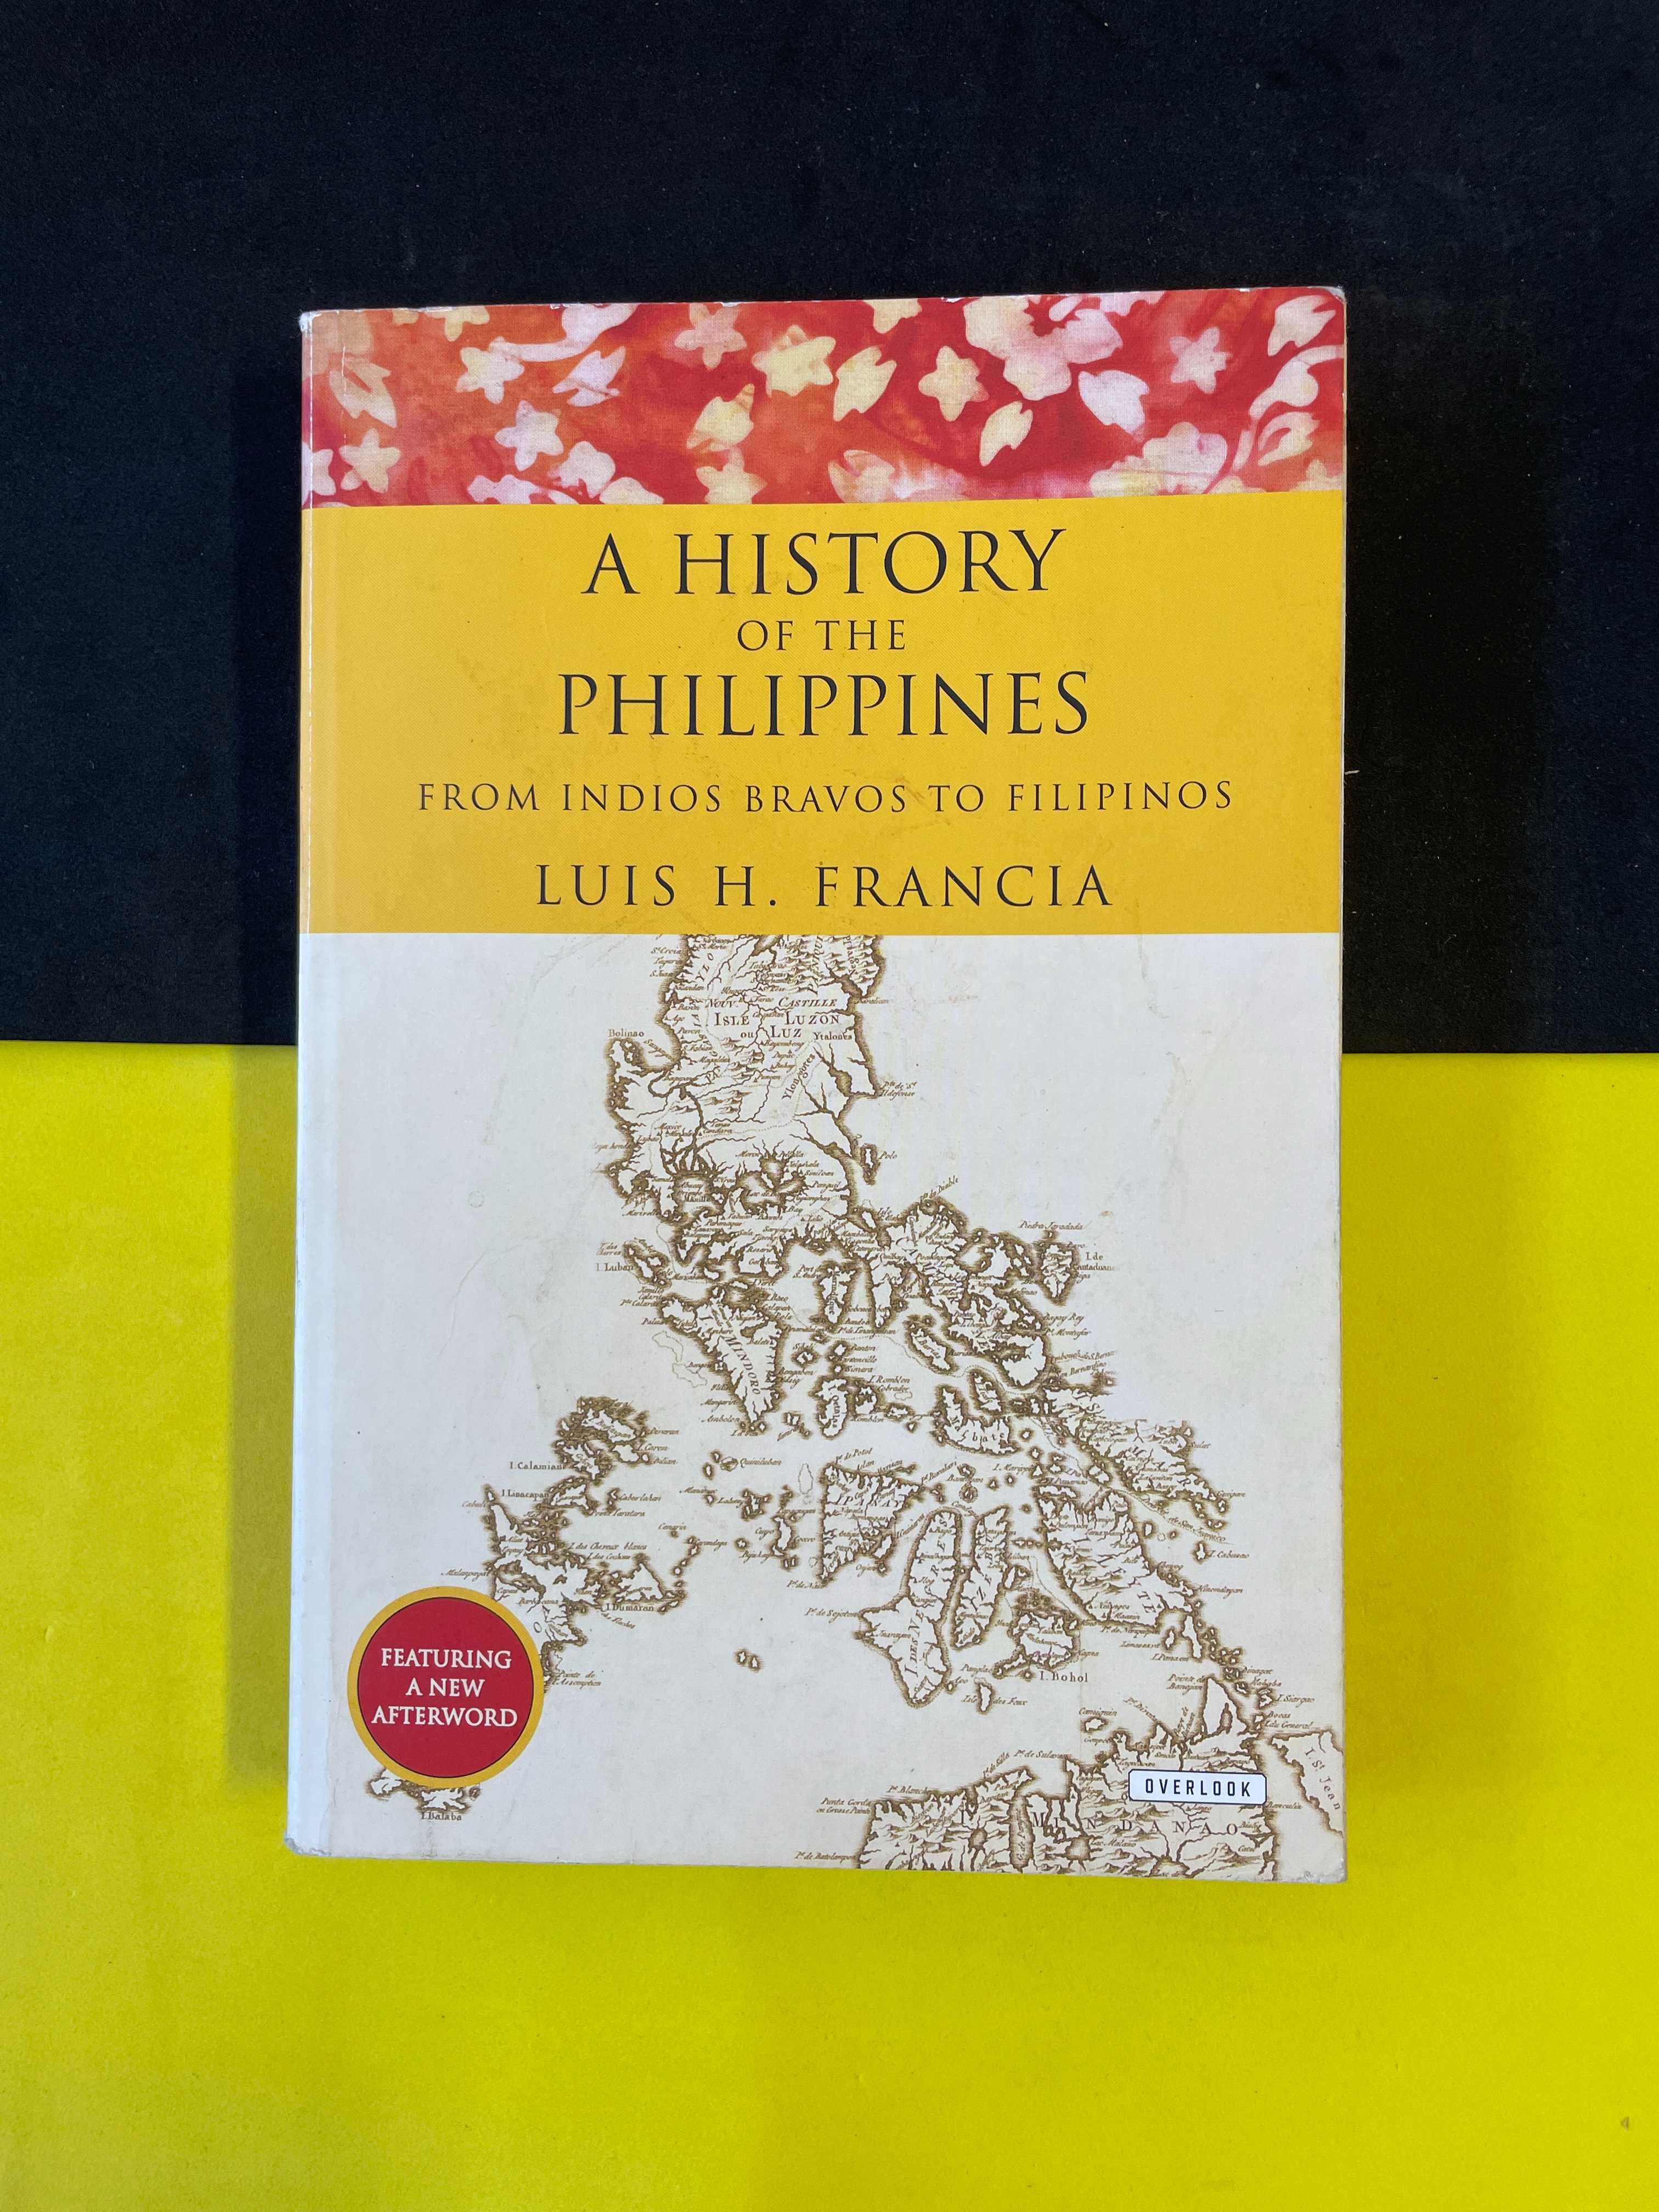 Luis H. Francia - A History of the Philippines